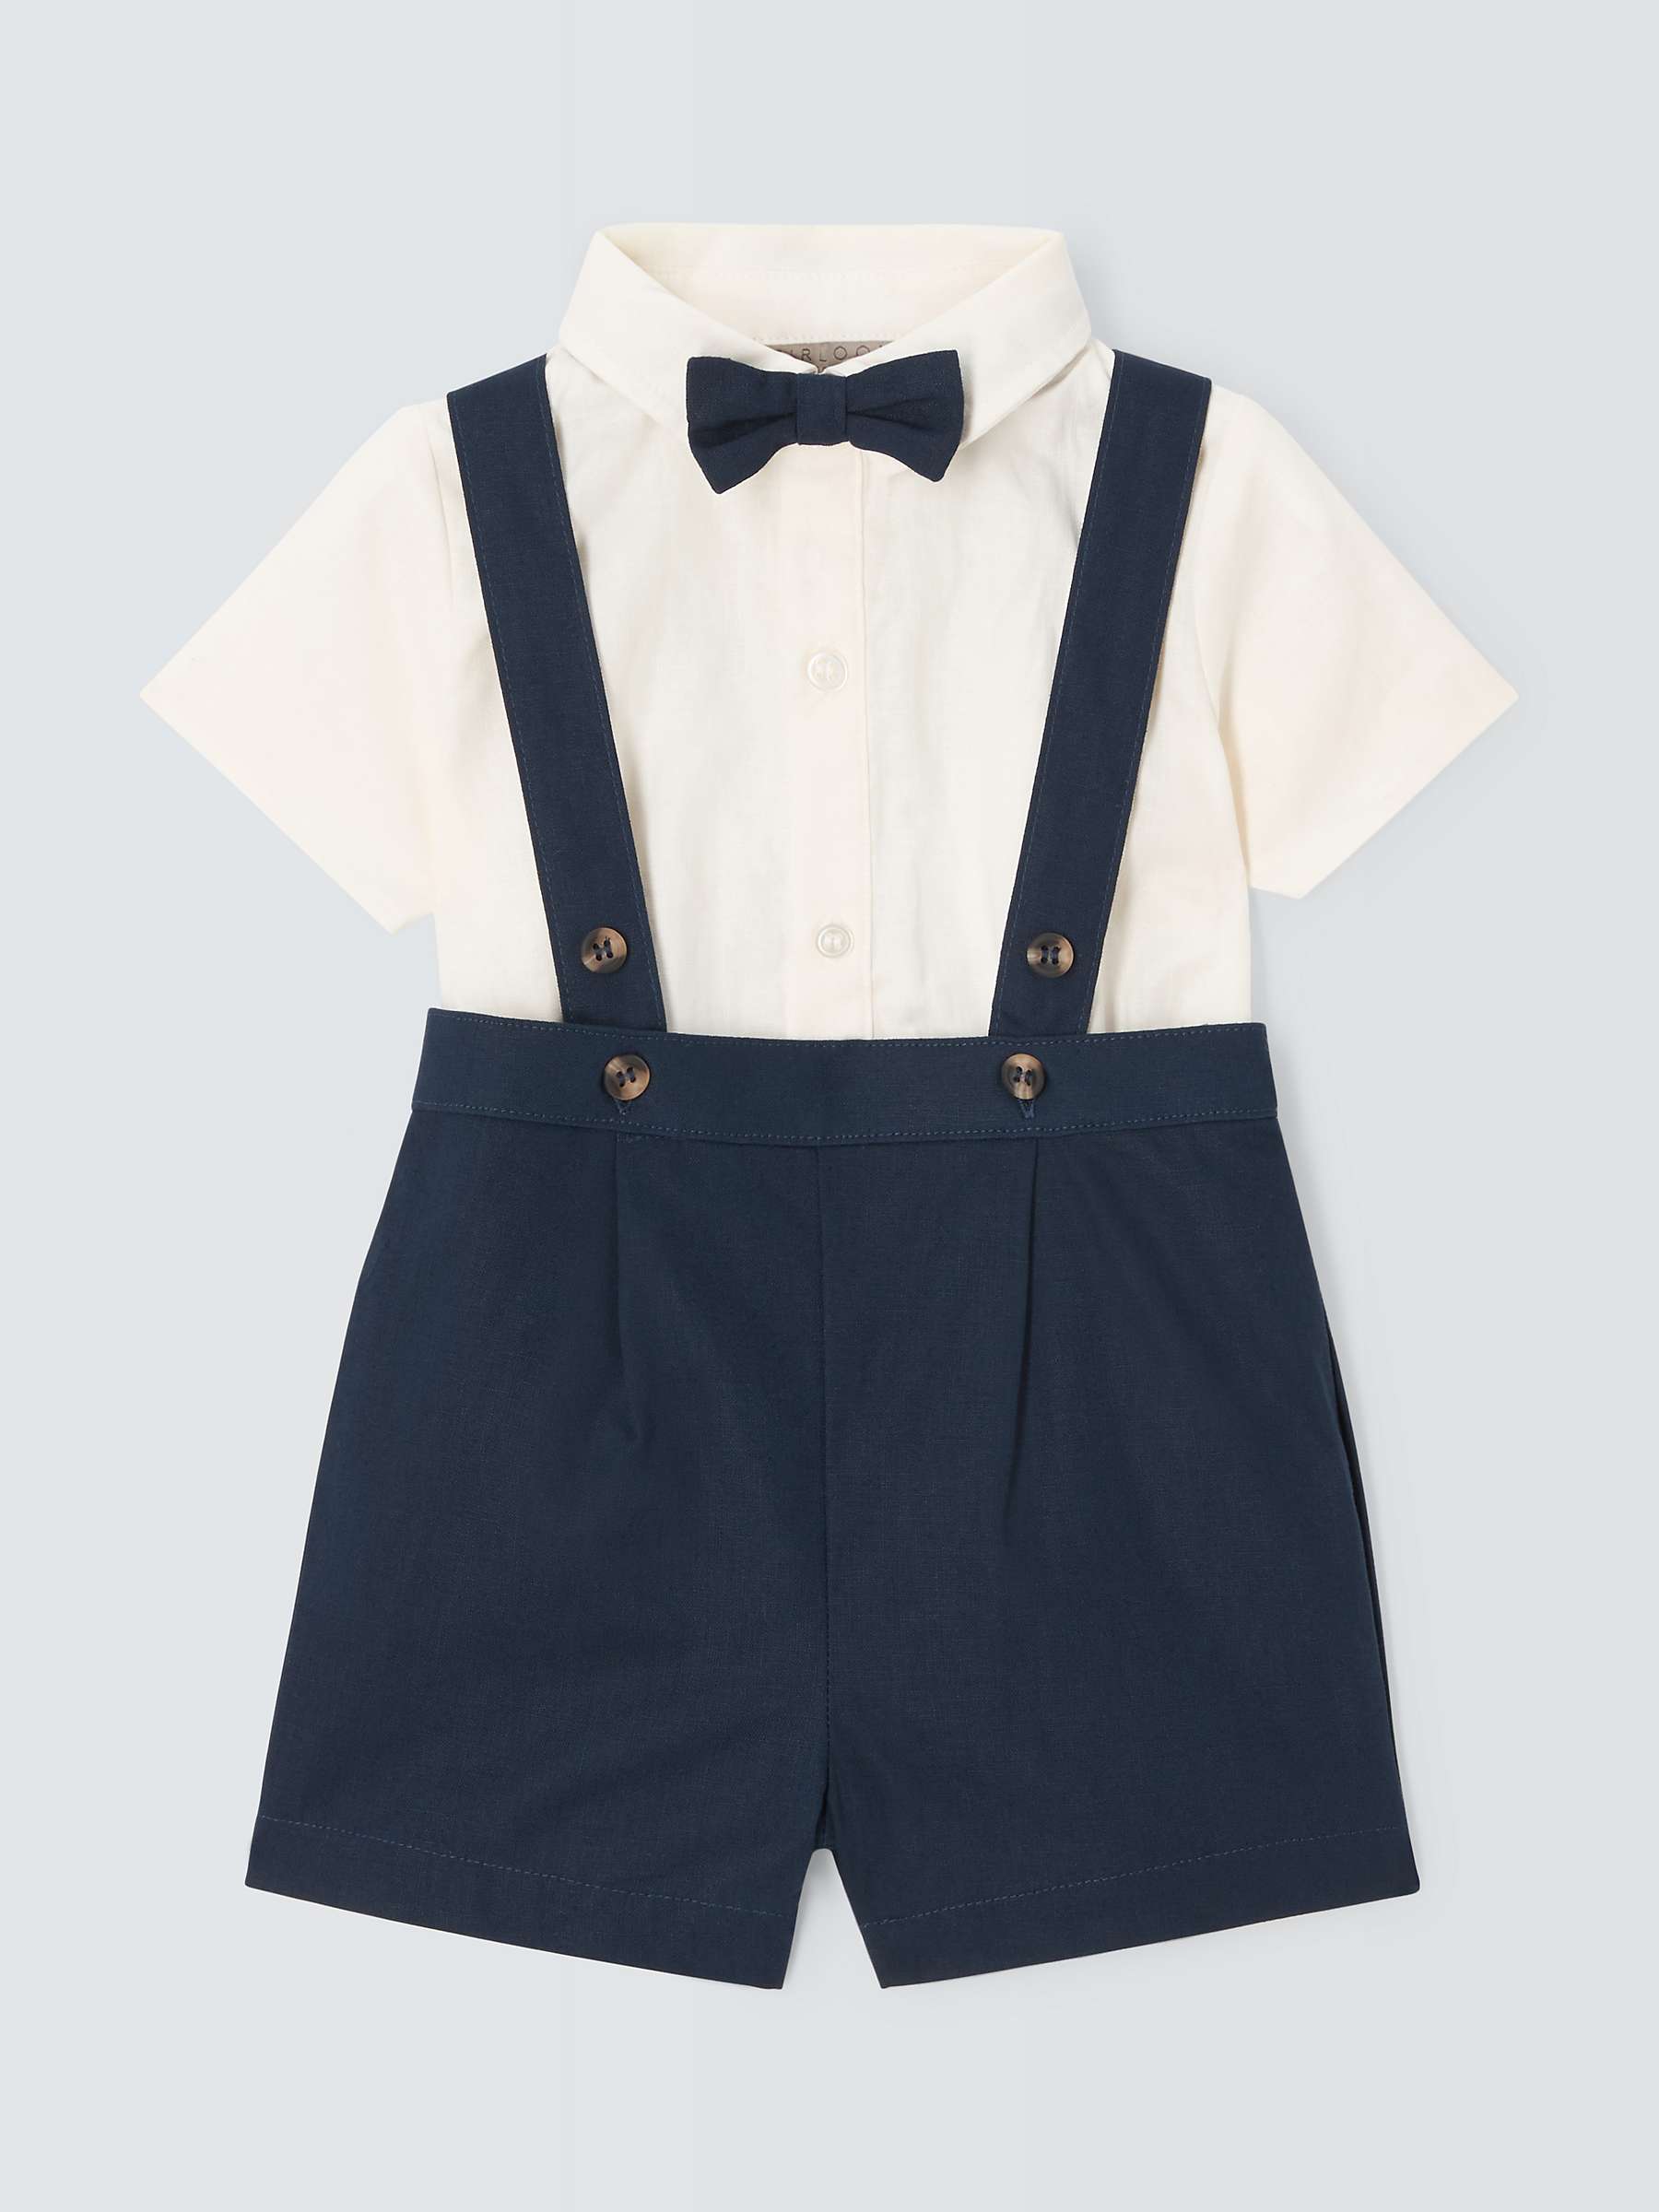 Buy John Lewis Heirloom Collection Baby Bodysuit, Shorts & Bow Tie, Set of 3, Navy Online at johnlewis.com